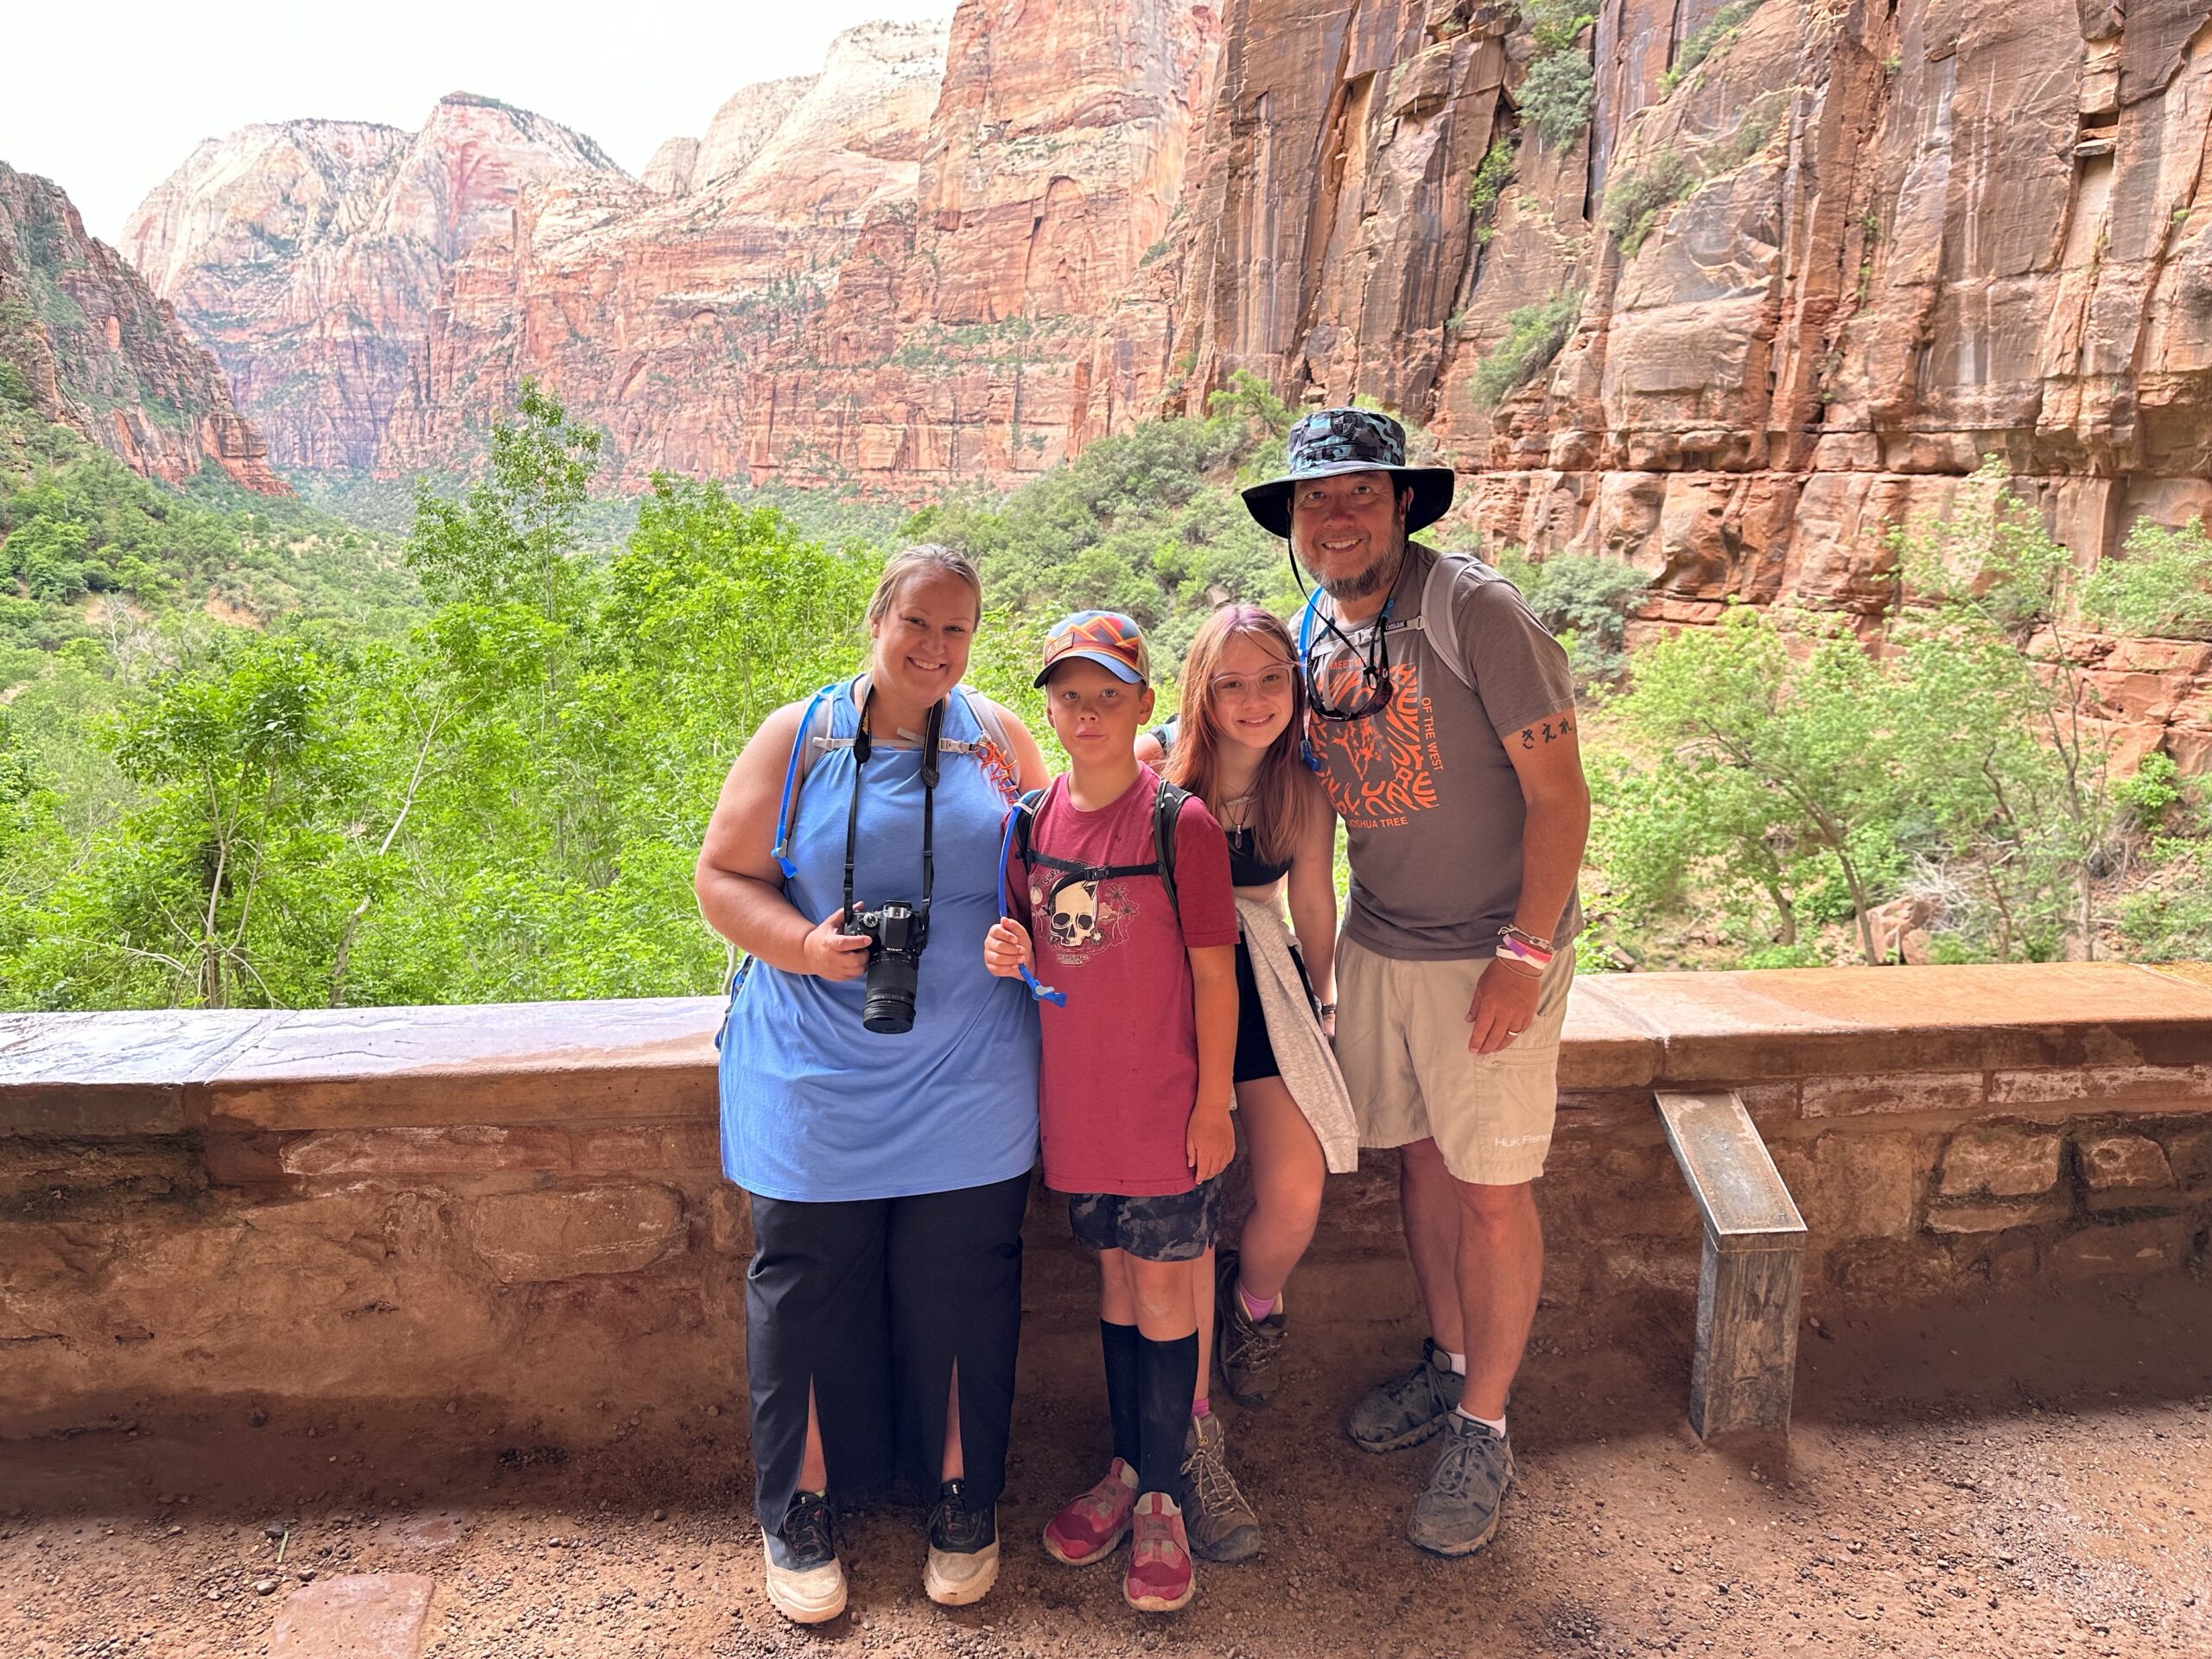 Family standing at the Weeping Gardens in Zion National Park with Red Mountains and trees in the background